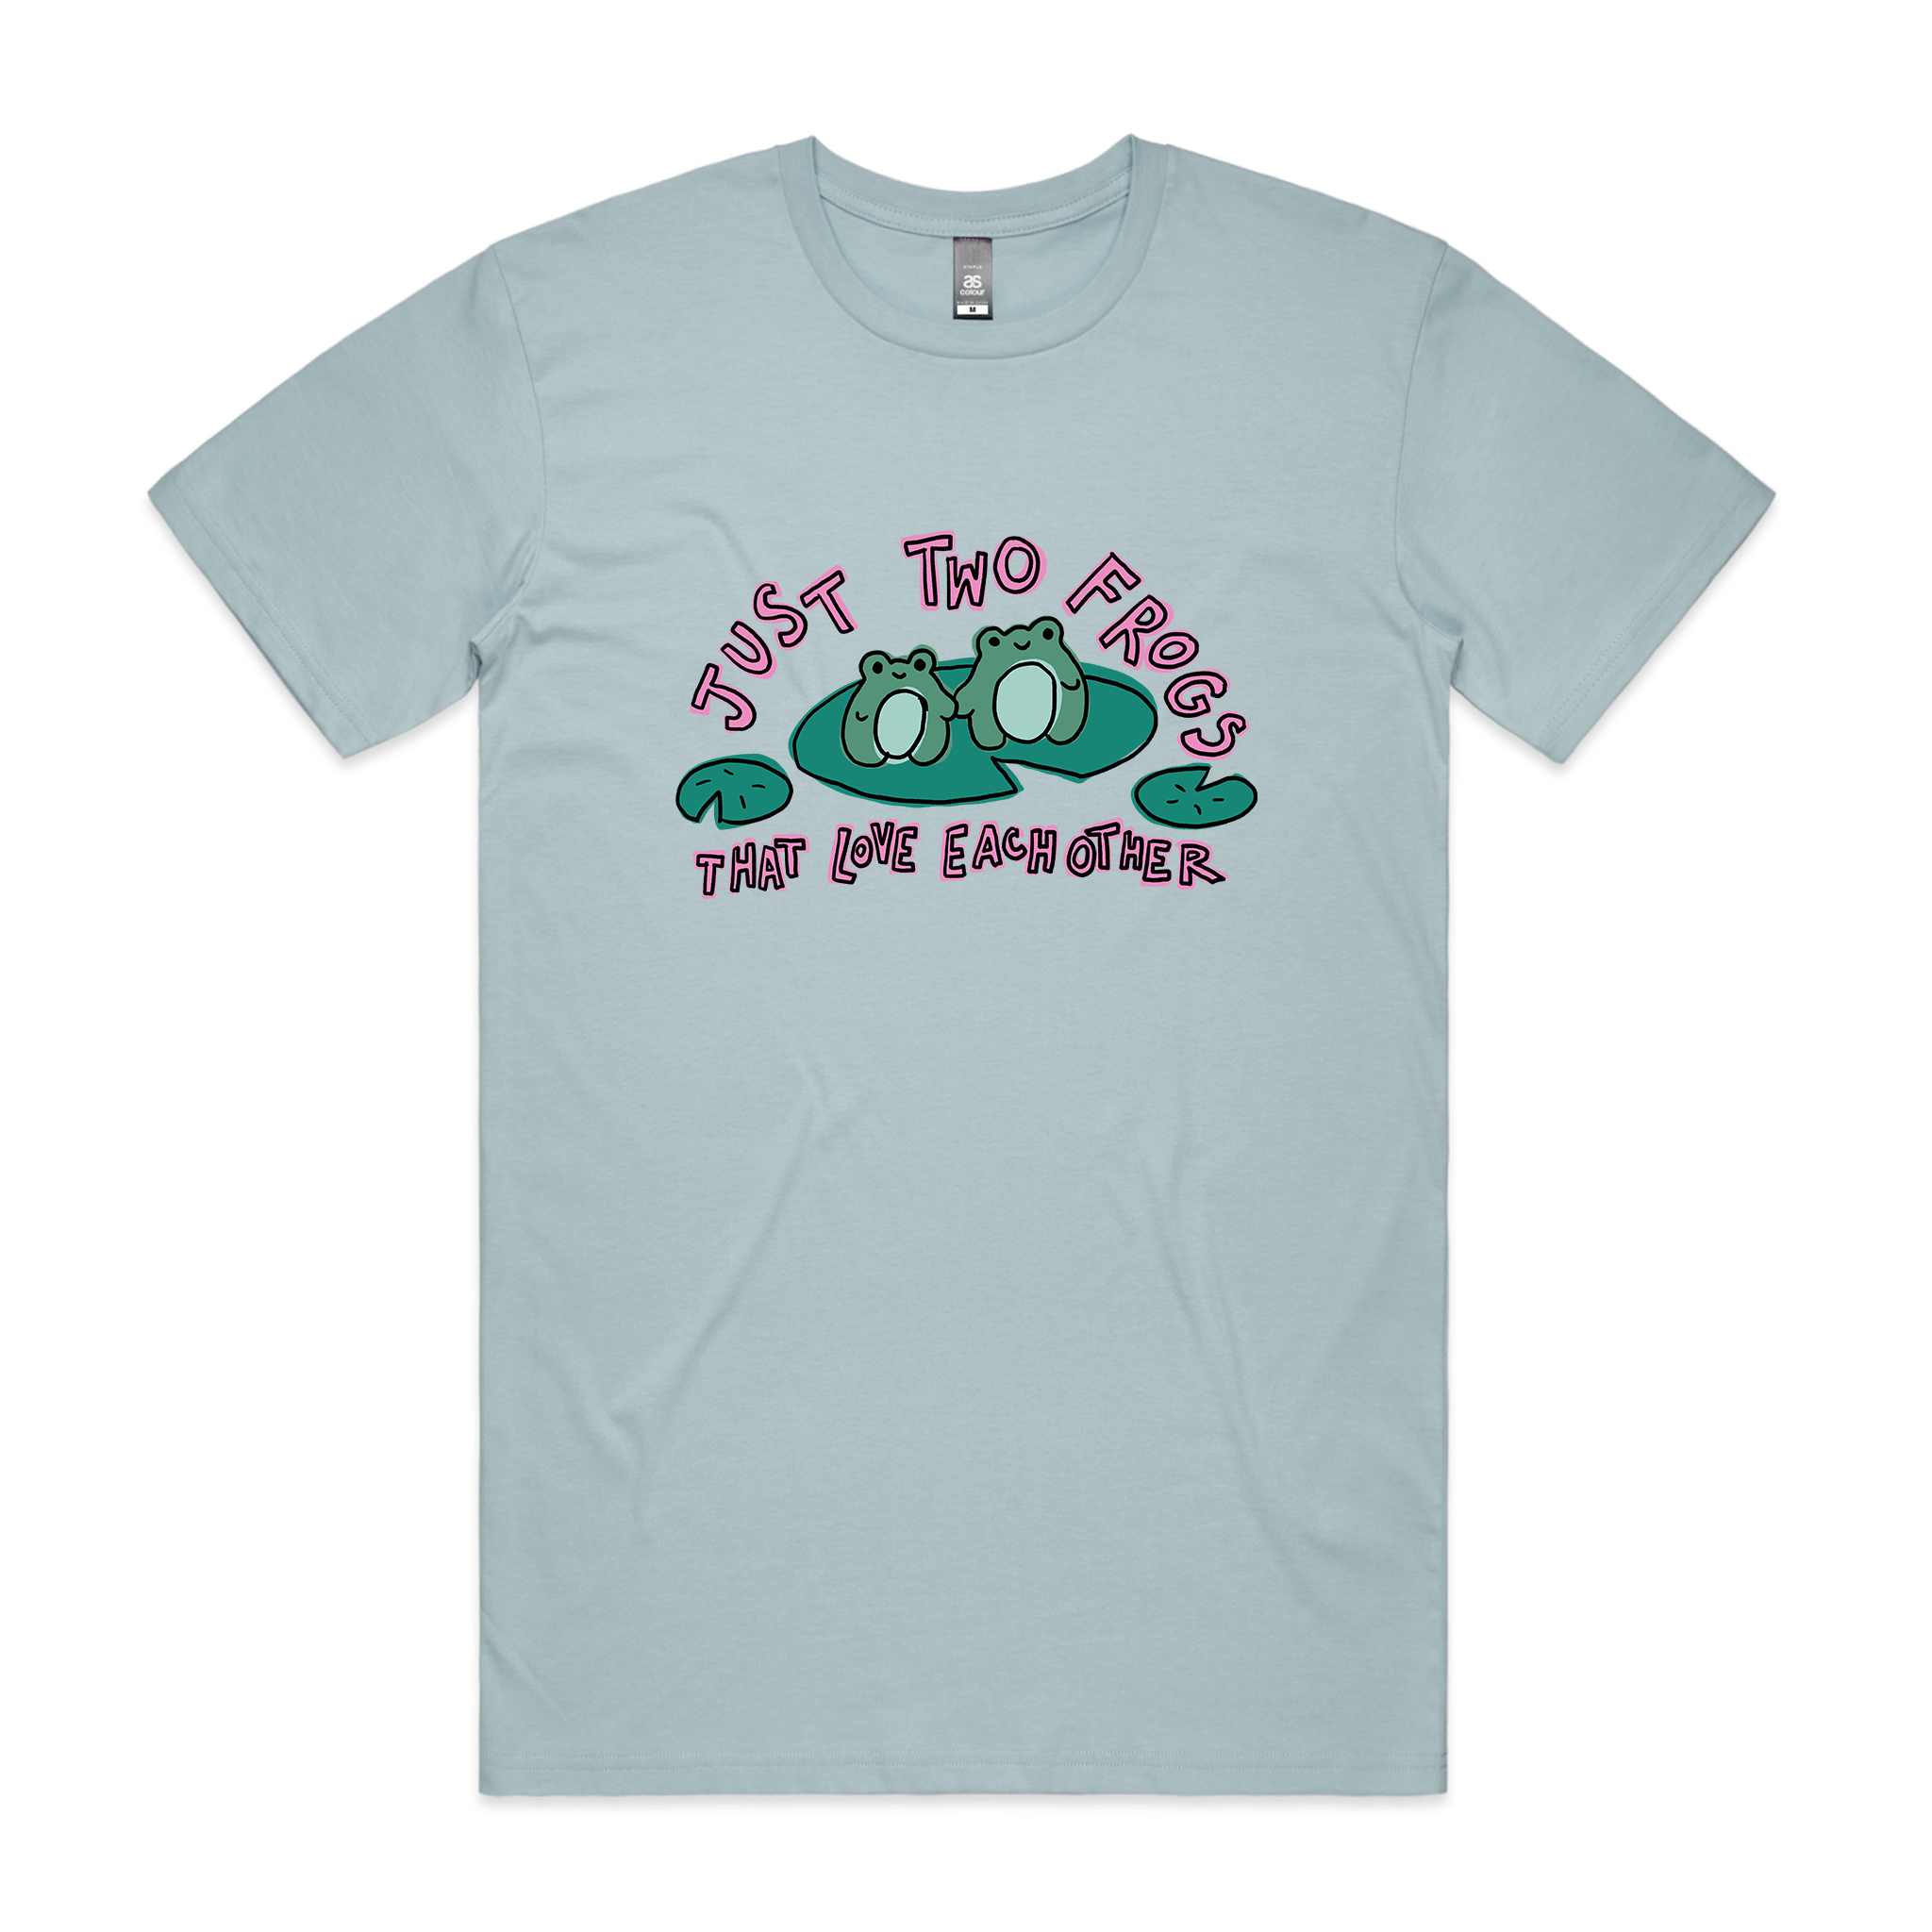 Just Two Frogs Tee